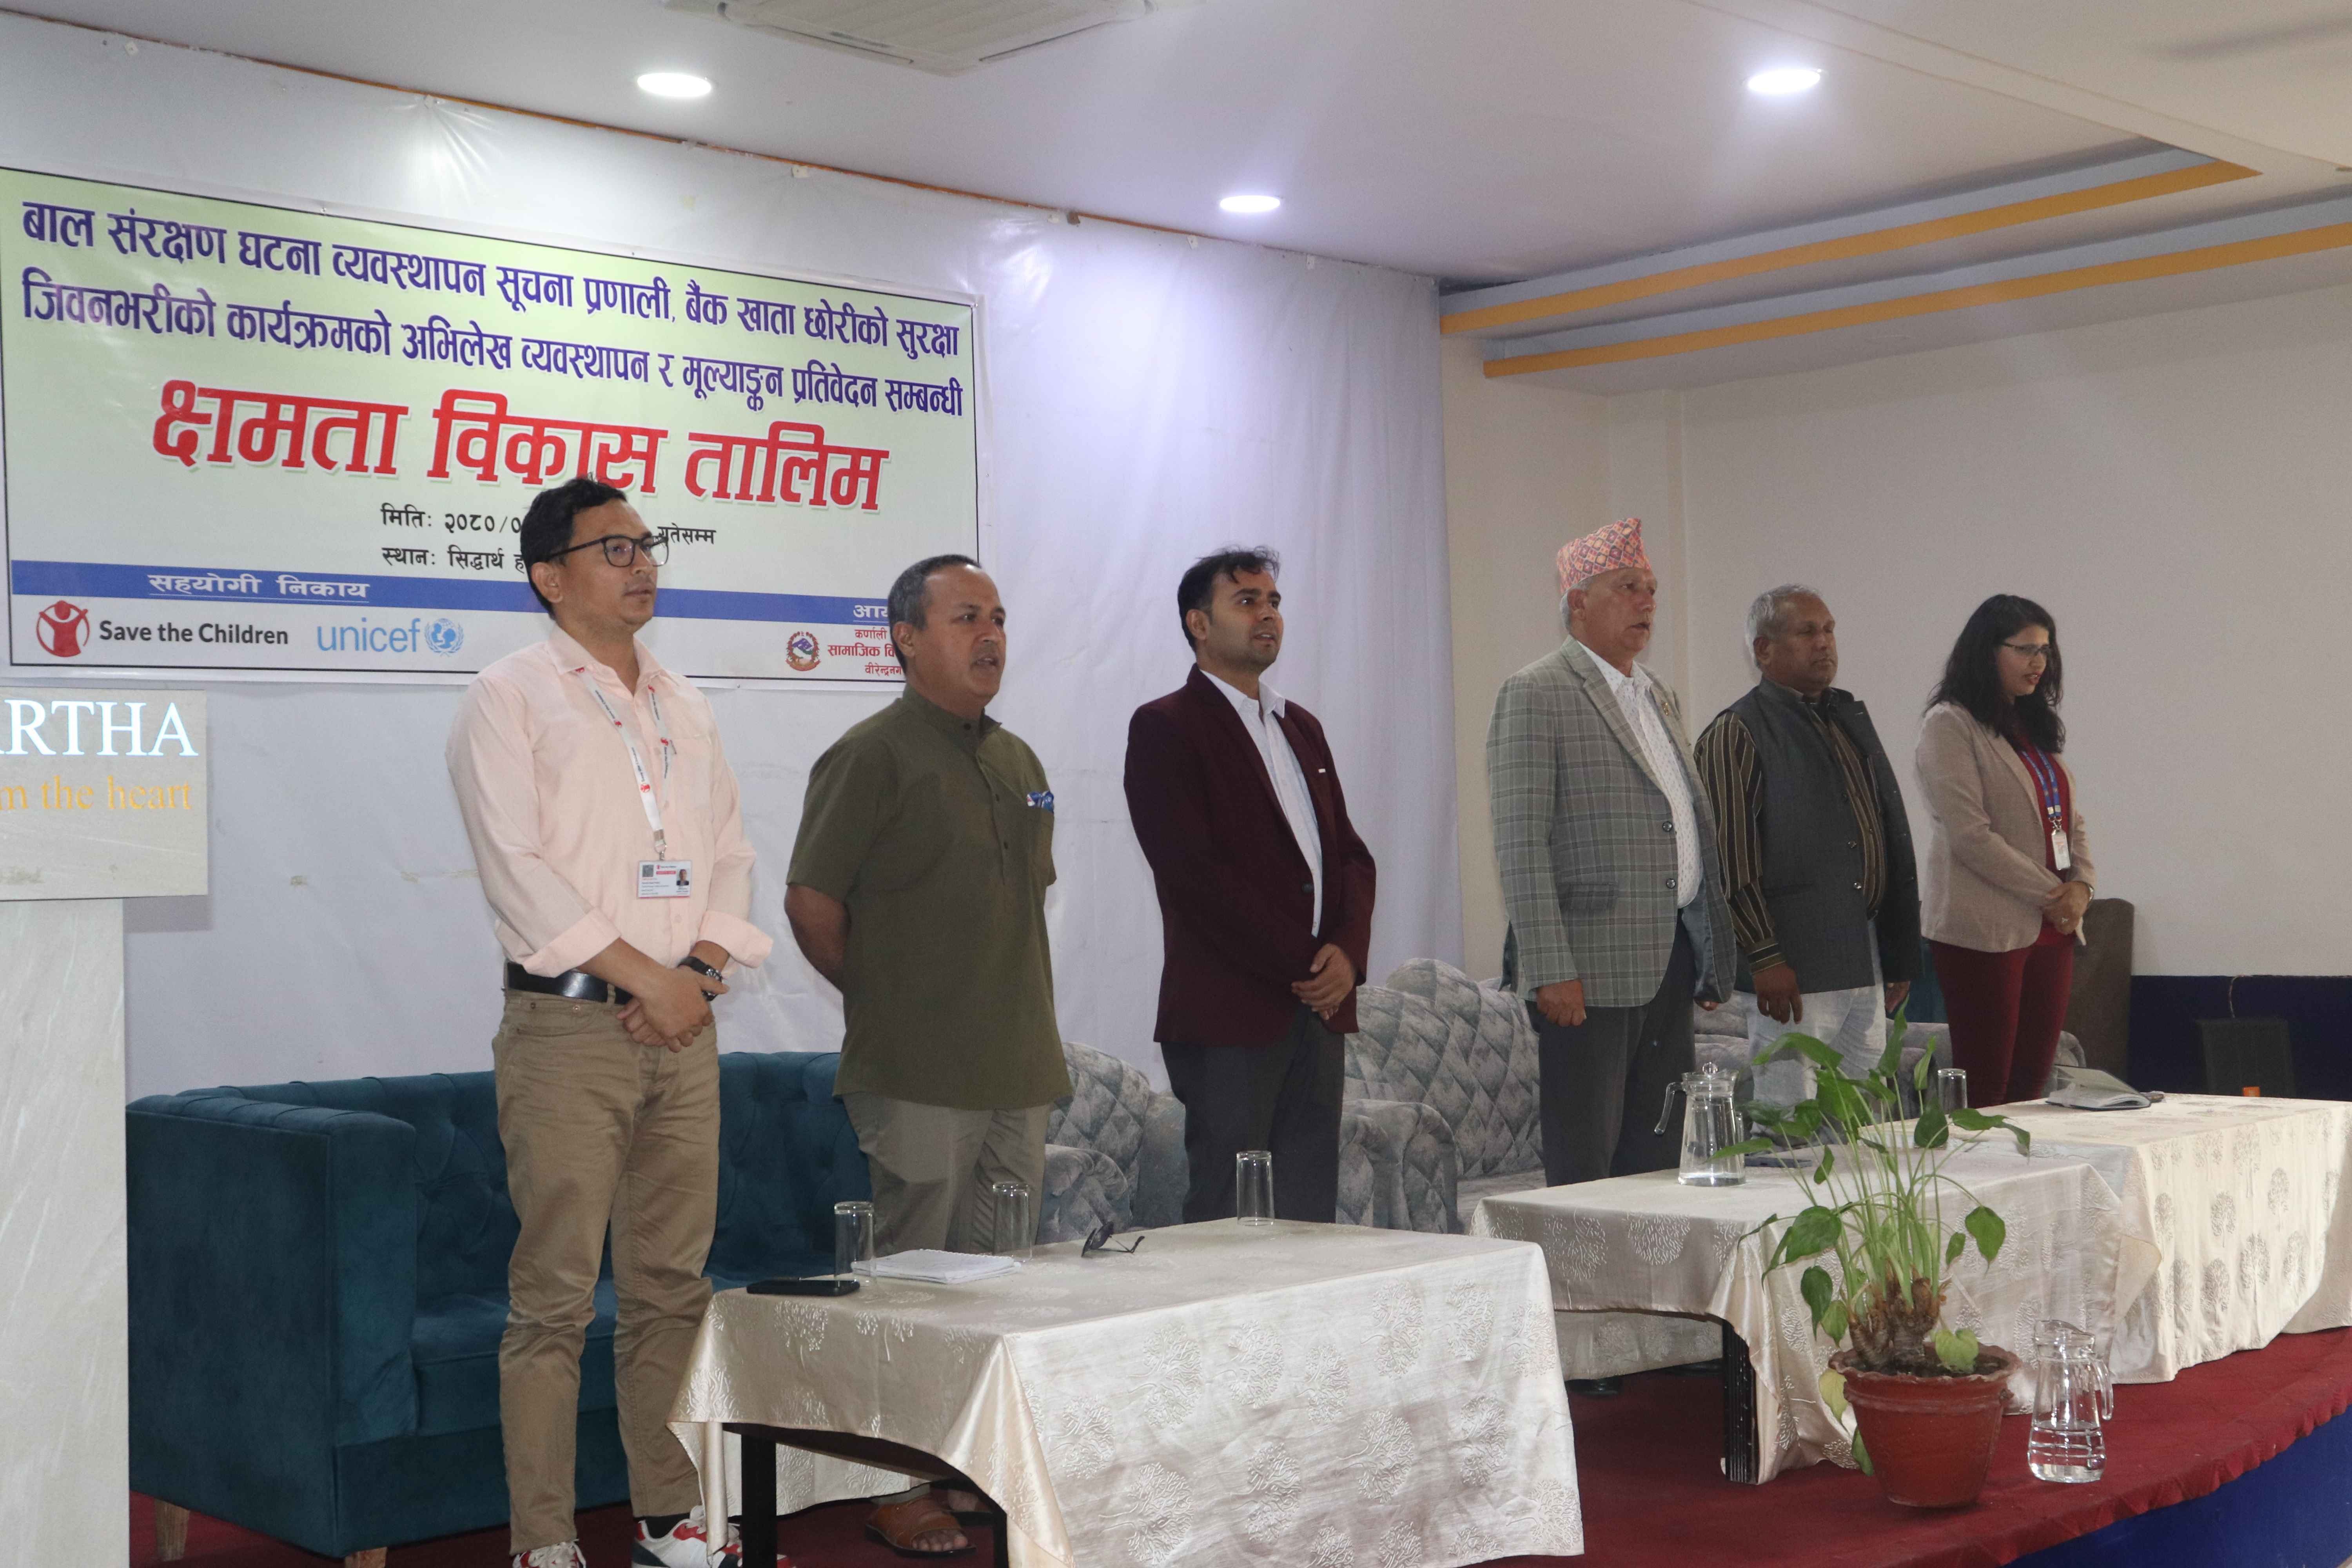 At the inauguration of the capacity development training for the employees working in women and children's branches of all 79 municipalities of Karnali province. Minister Shree Khadg Bahadur Pokharel